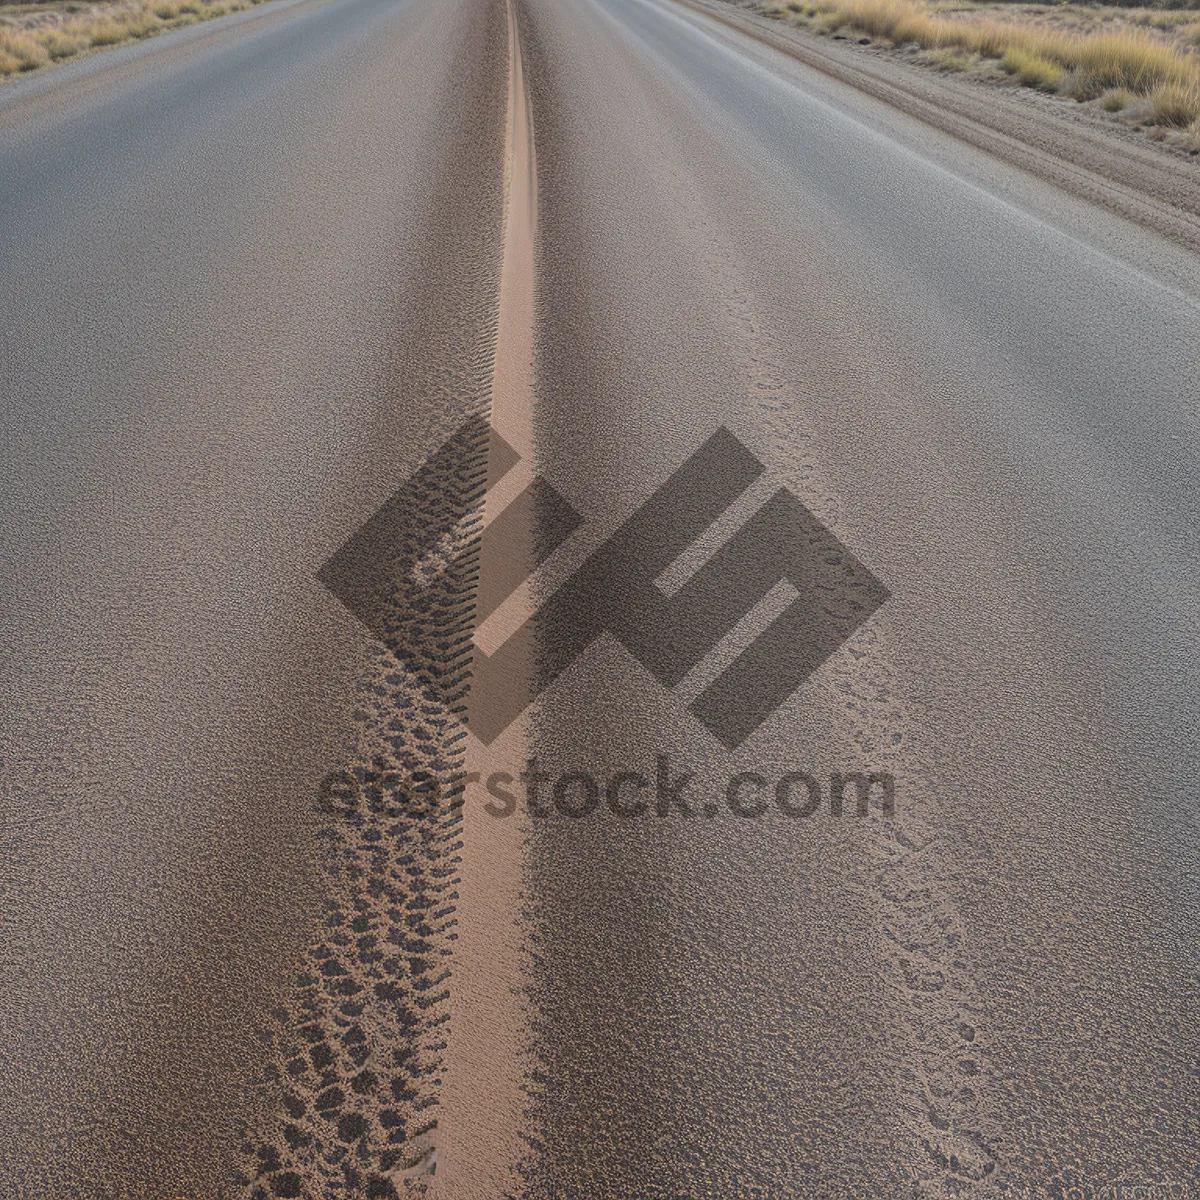 Picture of Textured Landscape: Asphalt Road on Fabric